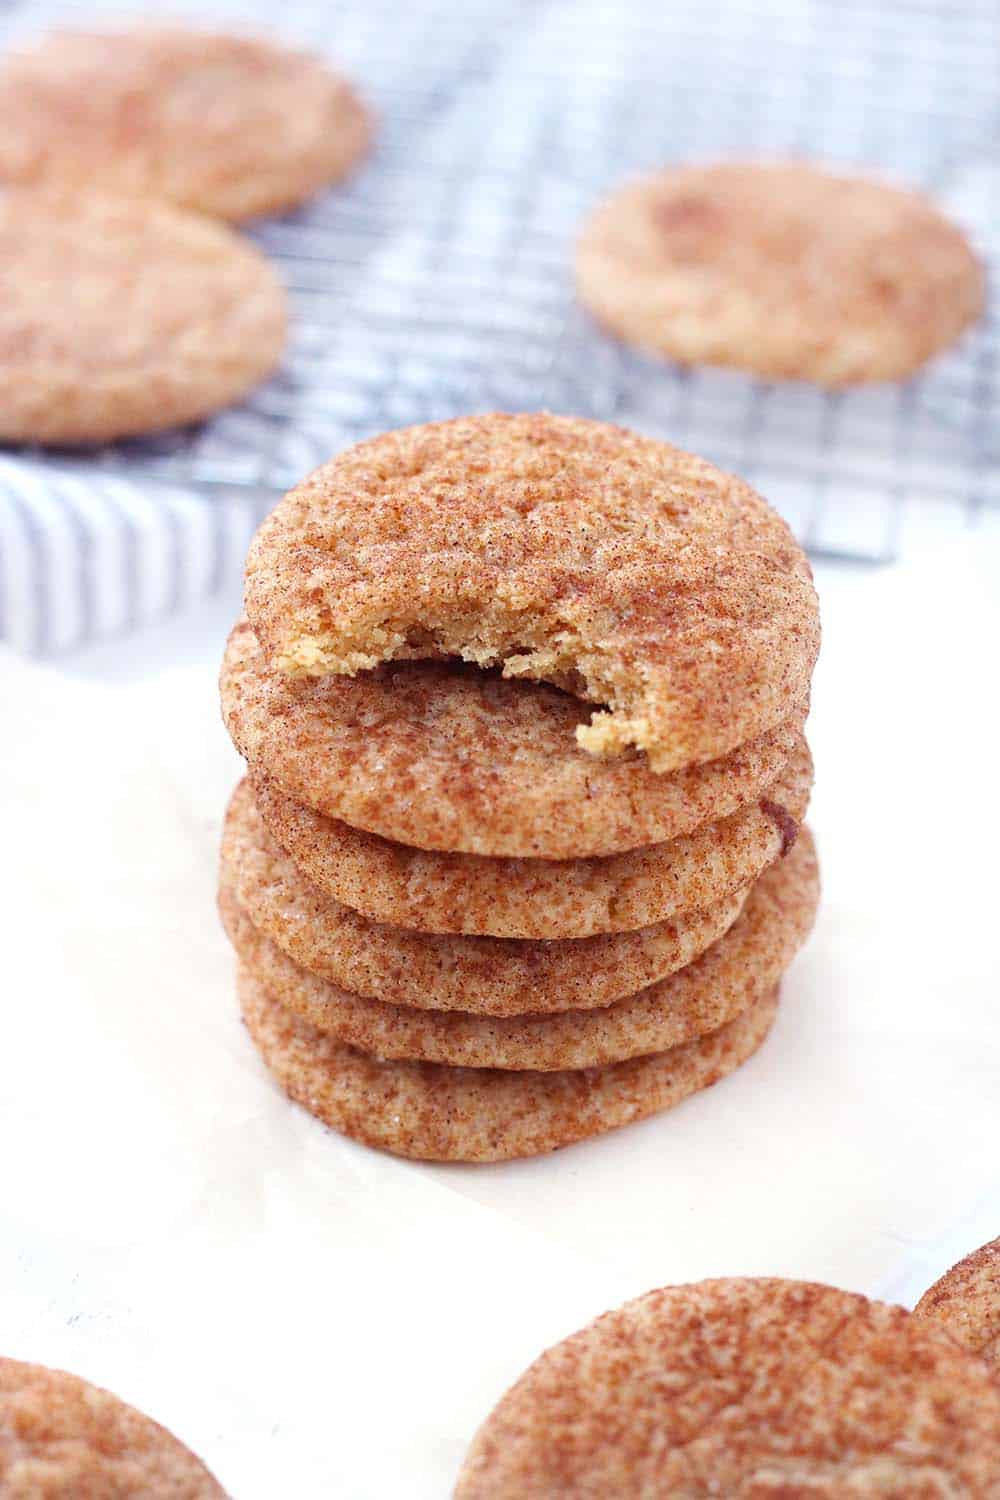 These Pumpkin Spice Snickerdoodles have warming pumpkin pie spices in the batter and are rolled in a mixture of brown and white sugars with cinnamon and more pumpkin pie spice! There's NO actual pumpkin used in this recipe. Make in bulk and keep in your freezer for a fun fall treat!